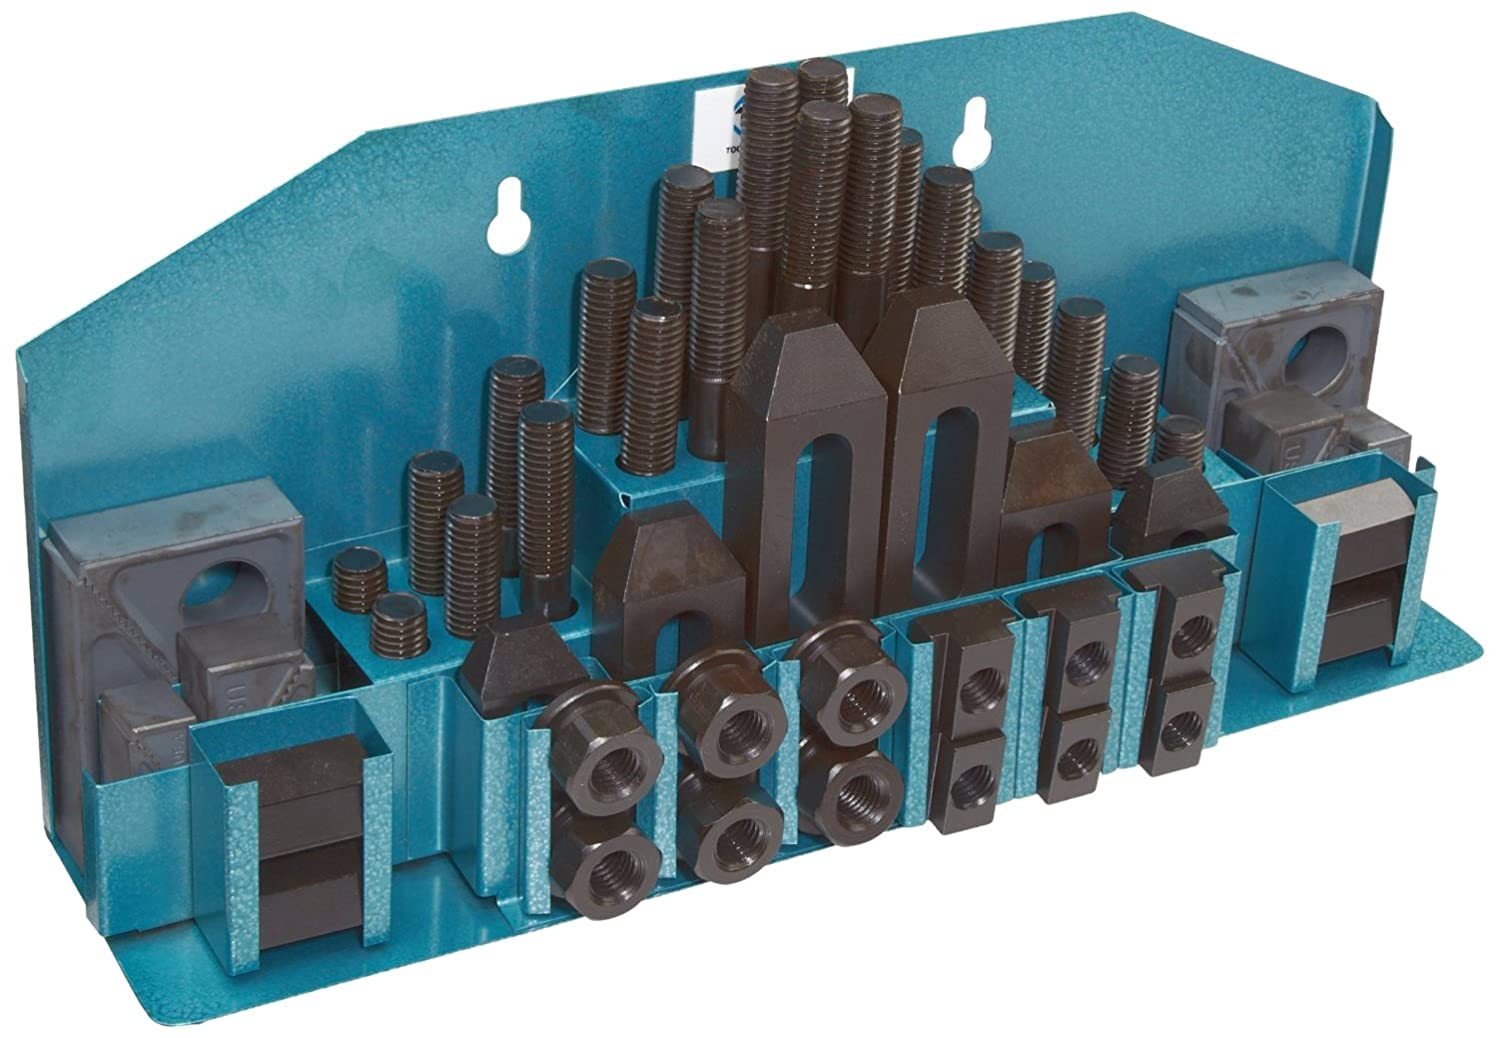 Primary image for Machinist Clamp Kit, 3/4" Table T-Slot X 5/8-11" Stud, 52 Pcs., By Te-Co.